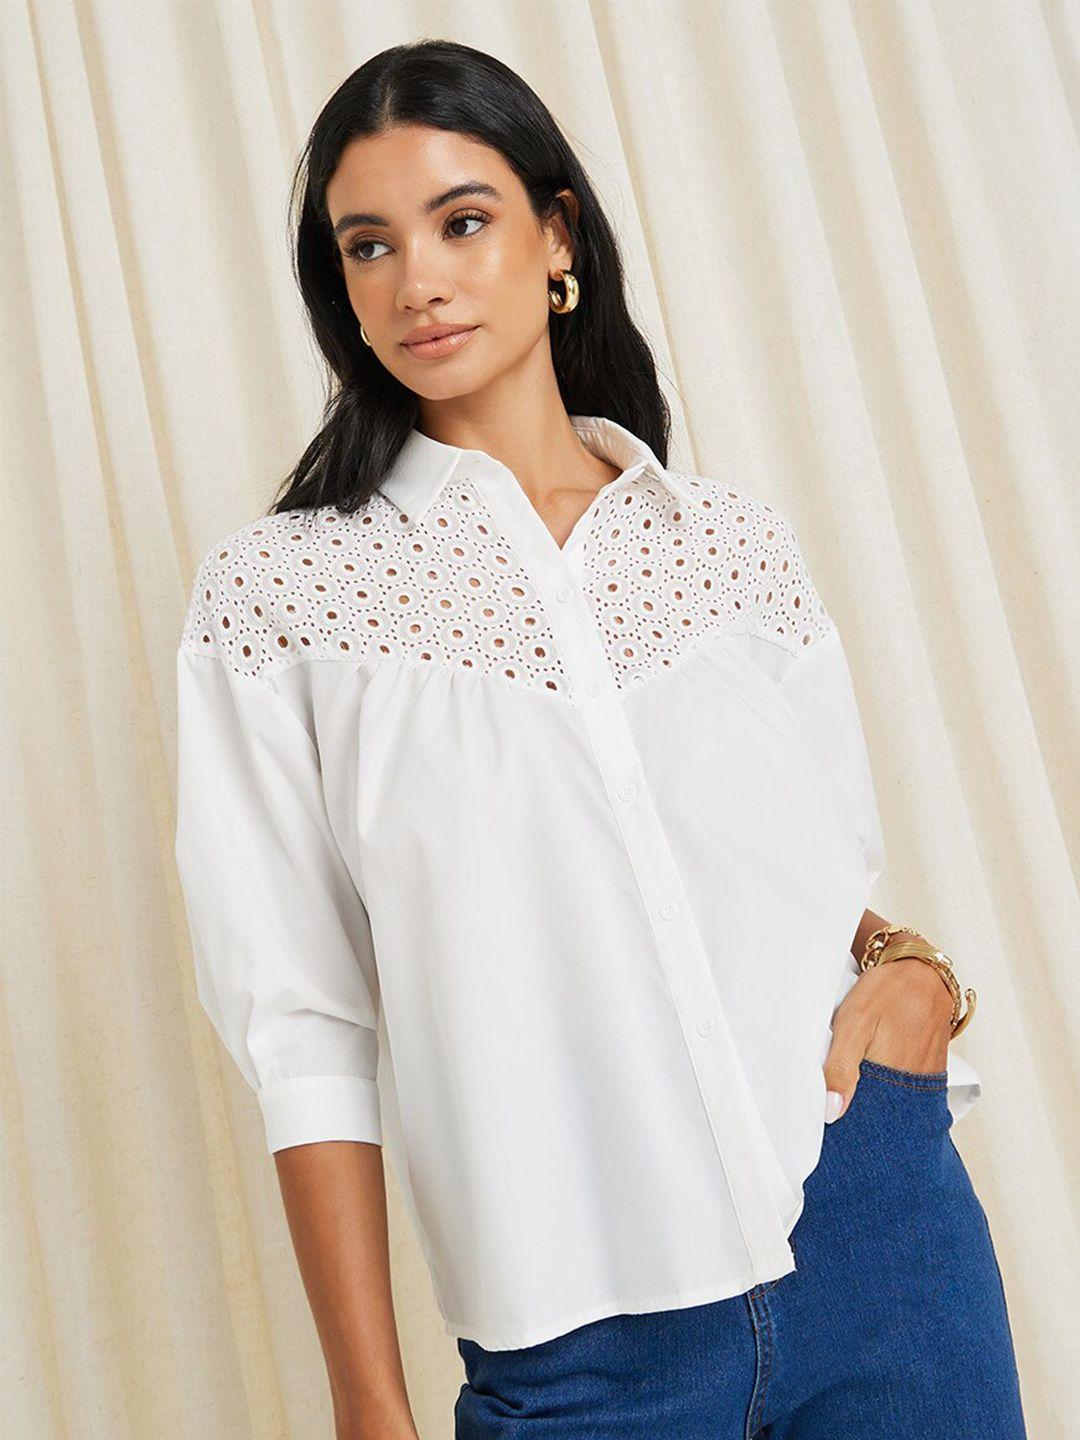 styli-extended-sleeves-spread-collar-casual-shirt